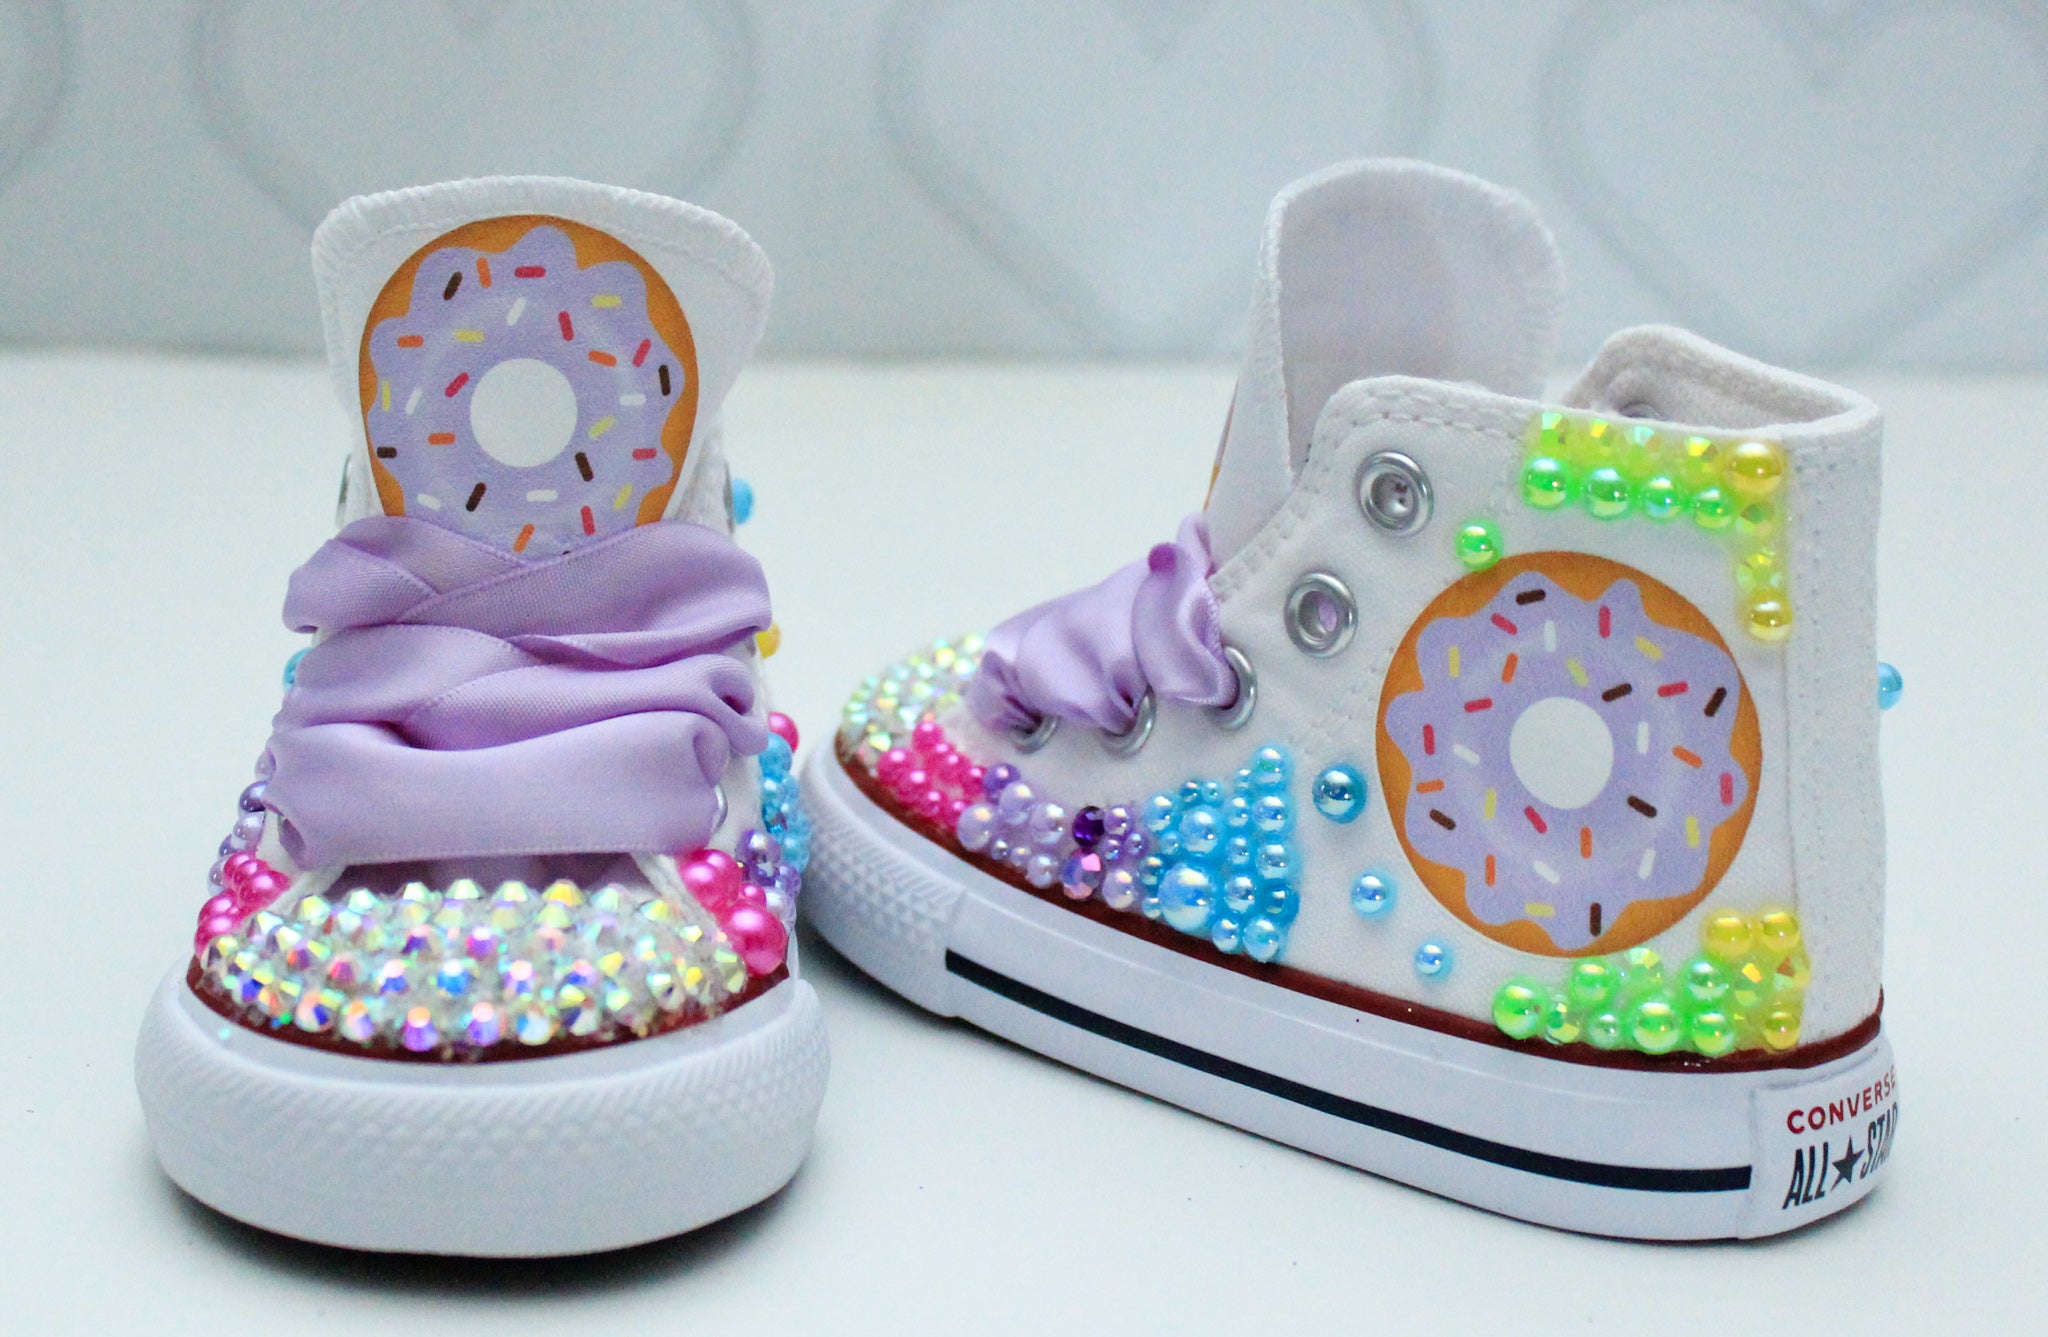 Donut shoes- Donut Converse-Girls Donut Shoes